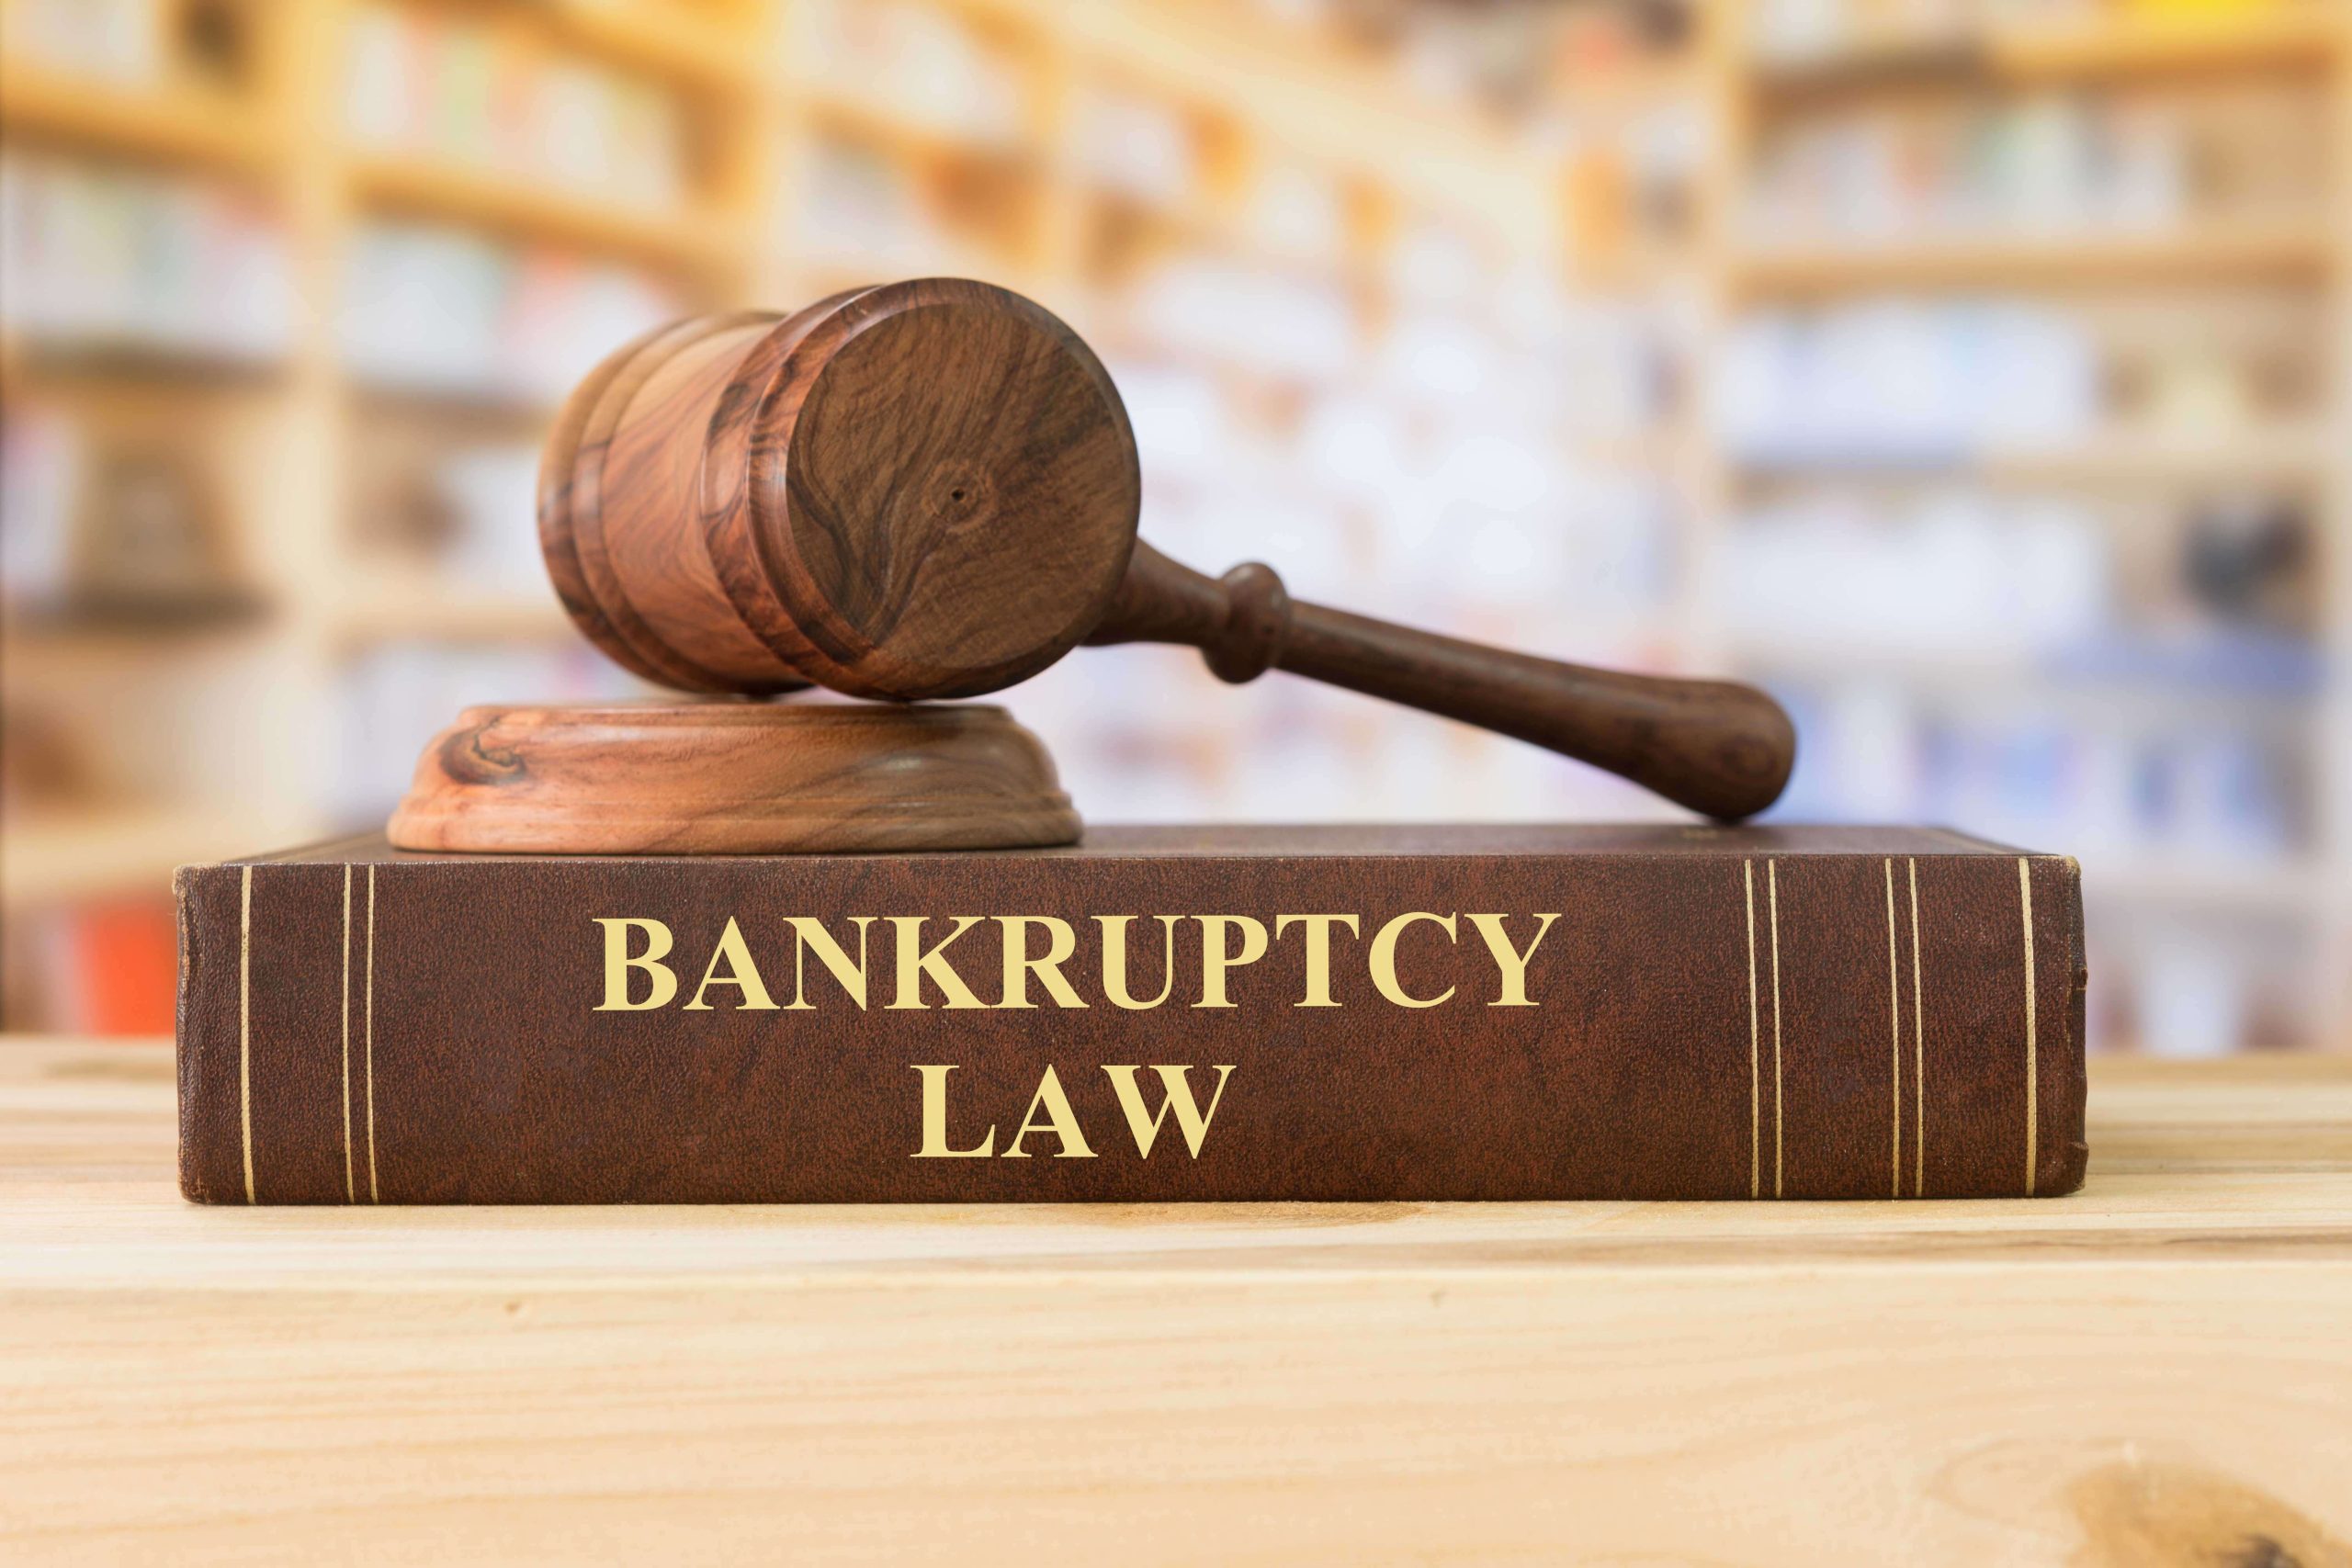 Expert bankruptcy law advice in Chicago, IL - let us guide you through the proc